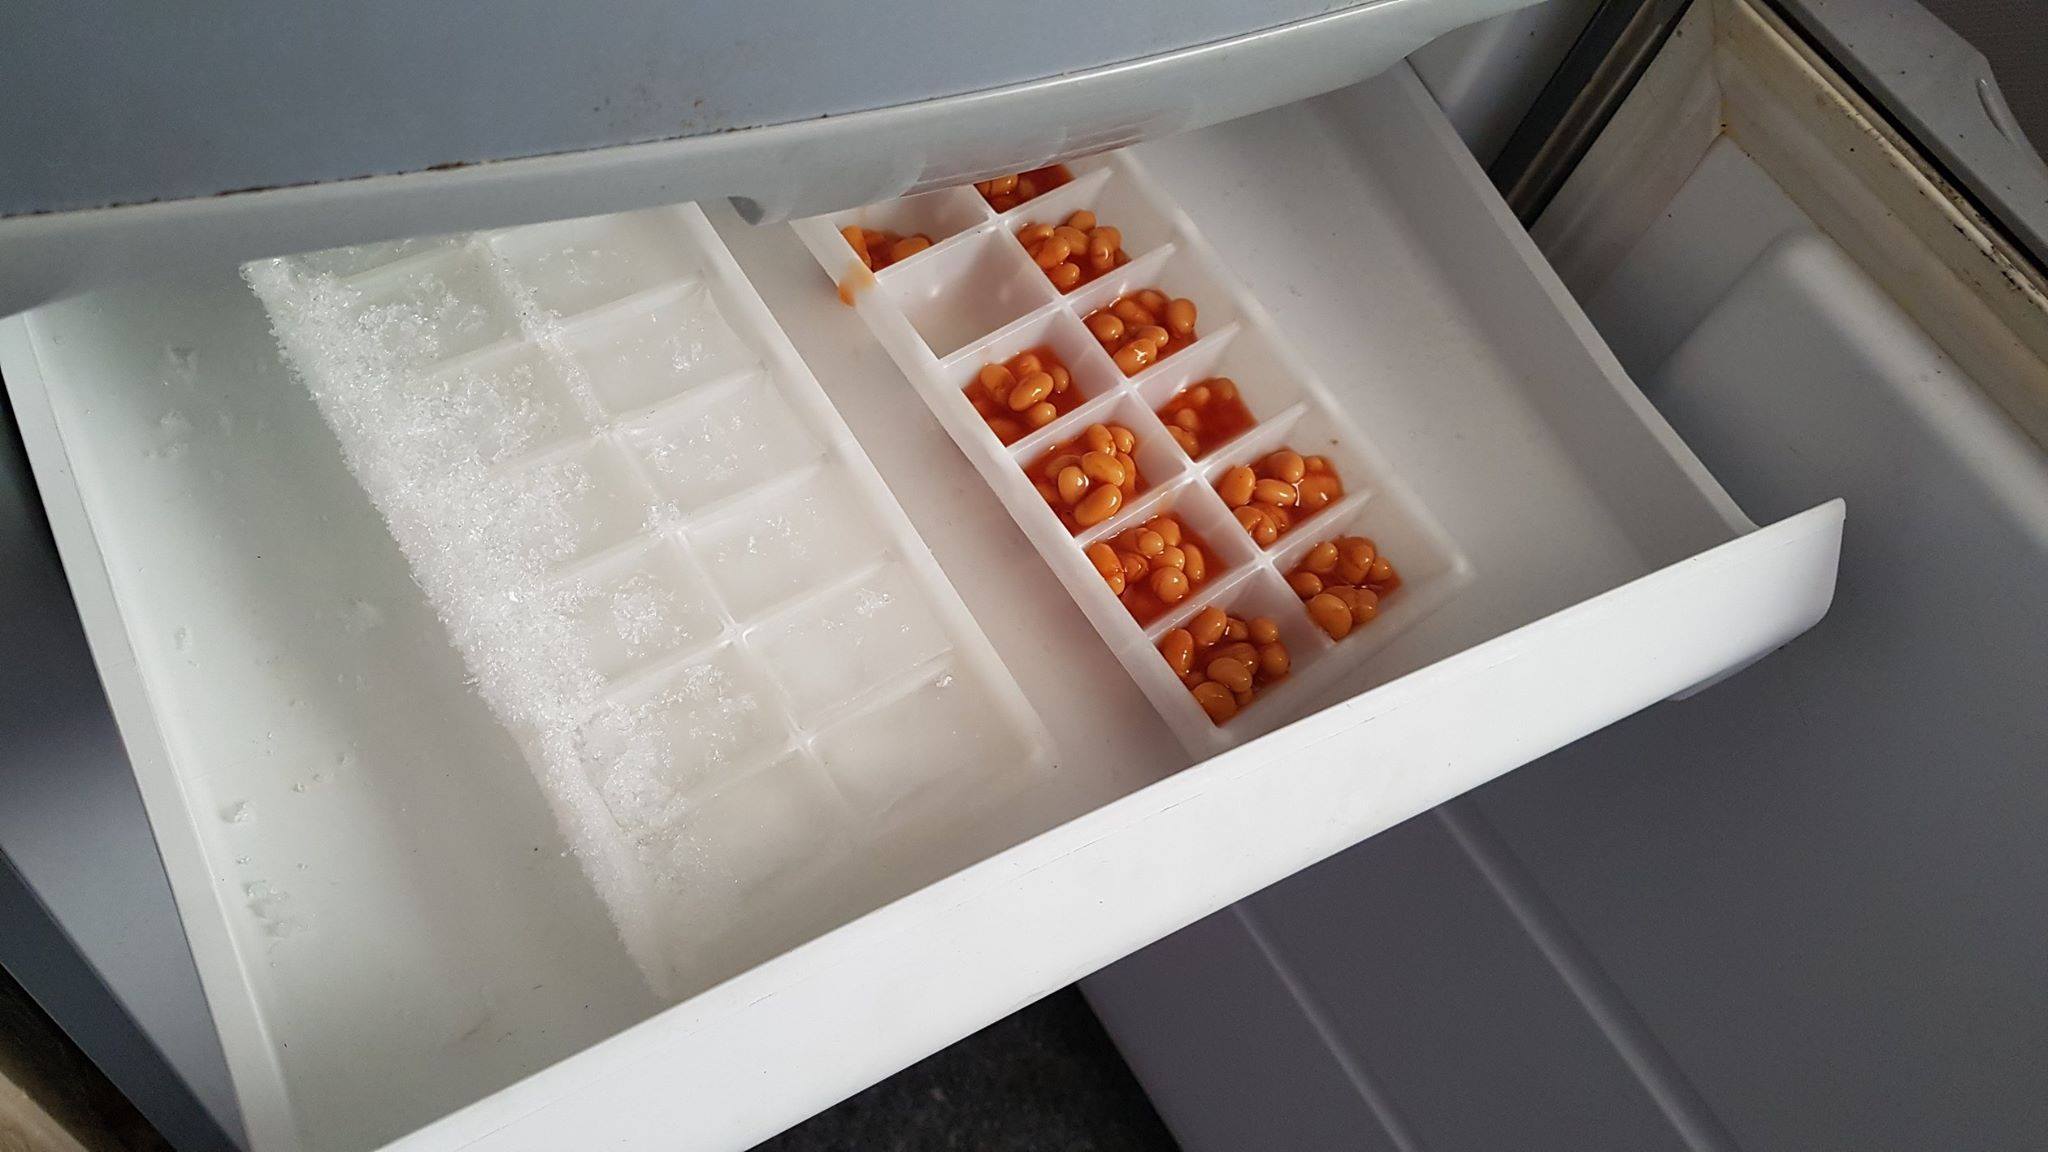 cursed image - baked beans in ice cubes